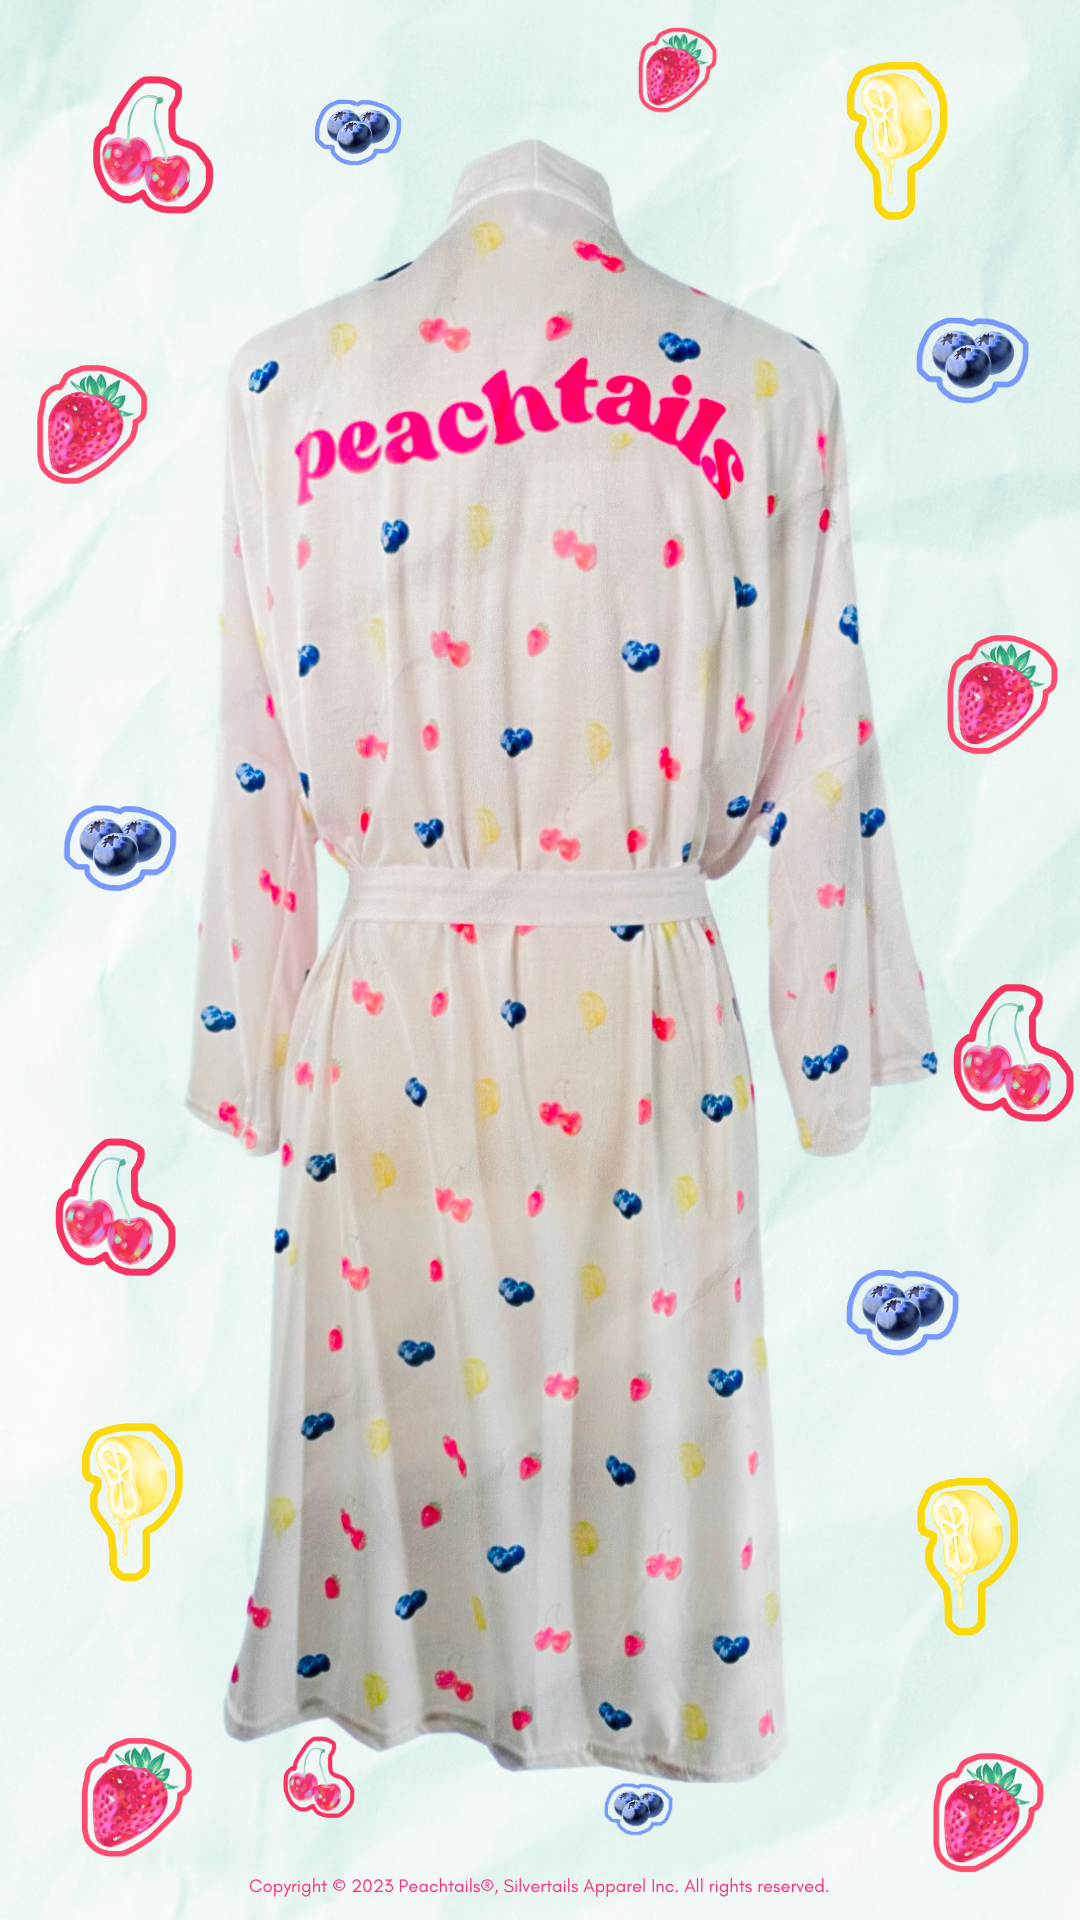 The image features a light-colored bathrobe with a fruit and ice pop pattern displayed on a patterned background. The name "peachtails" is printed across the back in bold, pink, cursive letters. Surrounding the robe are playful drawings of various fruits and ice pops in bright, cheerful colors. The design suggests a fun, casual style, and the robe appears soft and comfortable. A copyright statement at the bottom attributes the design to Peachtails© and Silverlakits Apparel Inc.